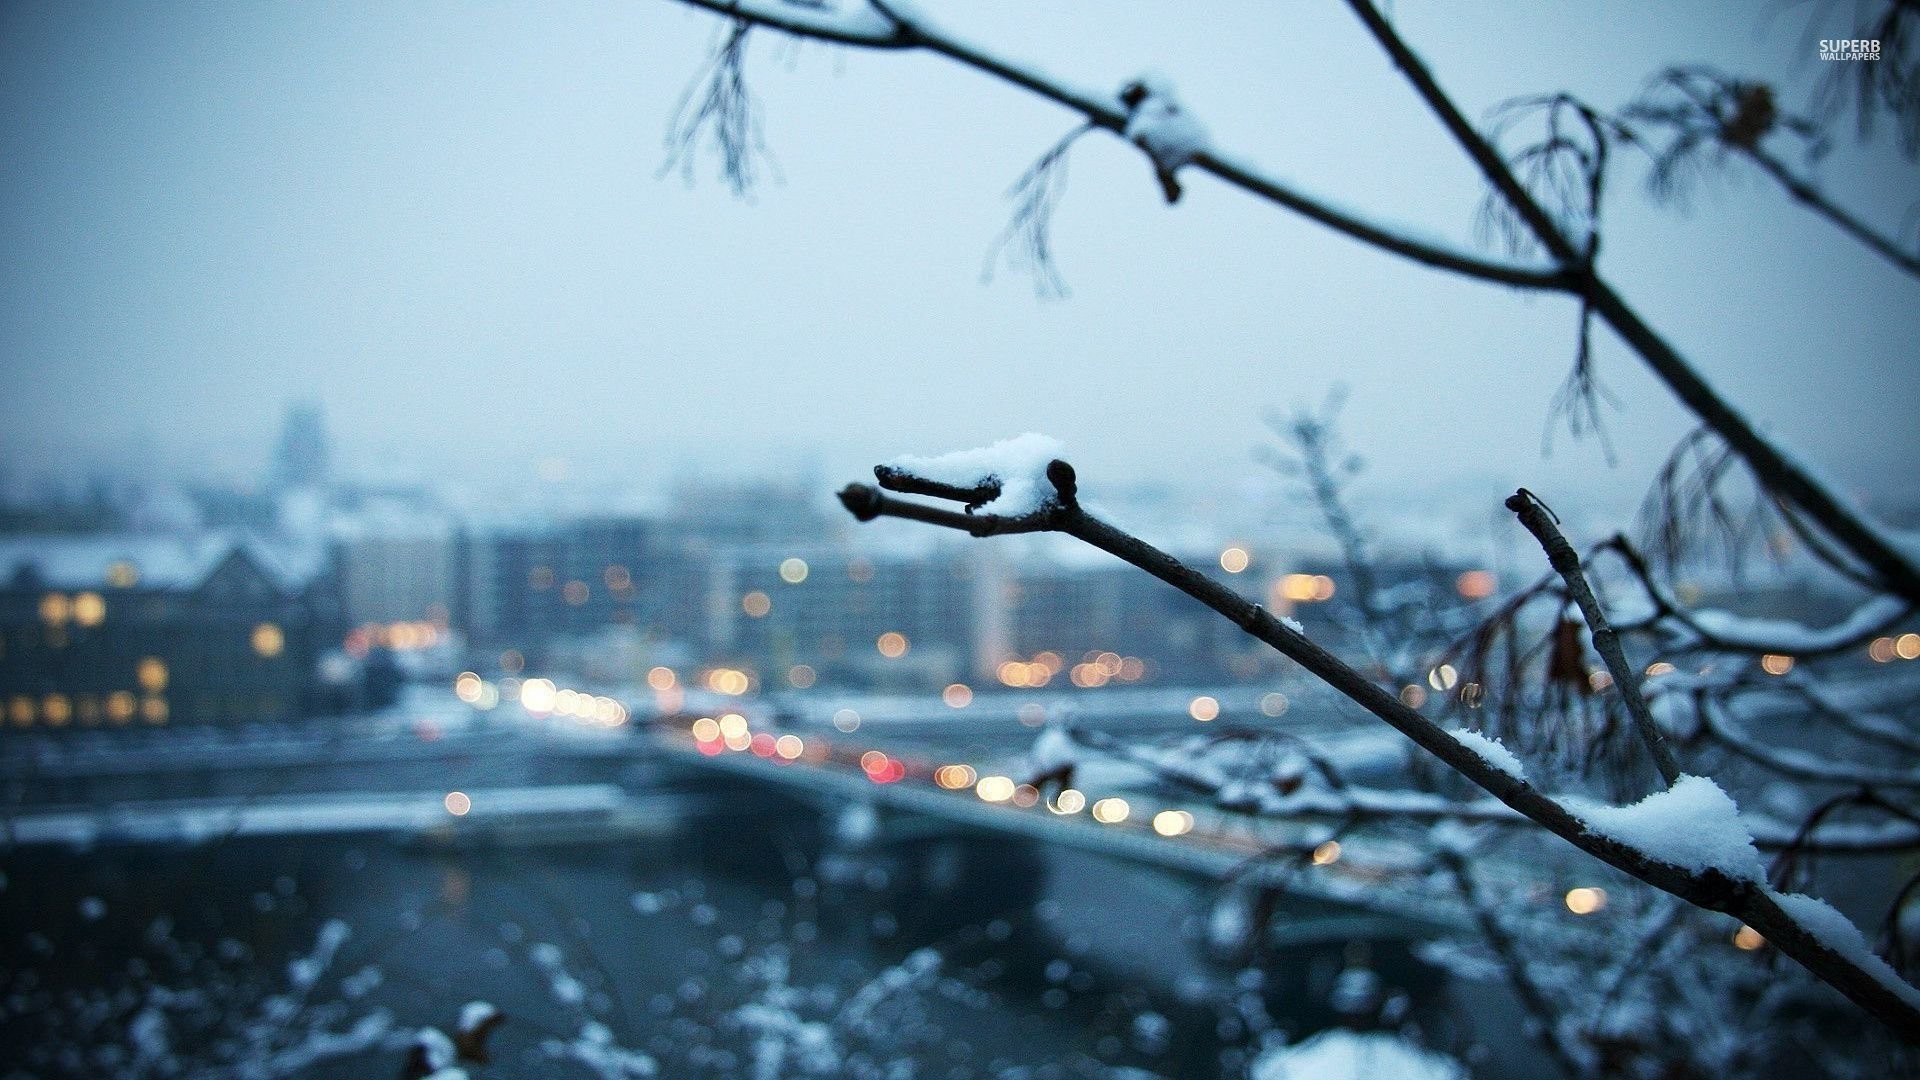 1920x1080 Snowy Branch With The City In Background